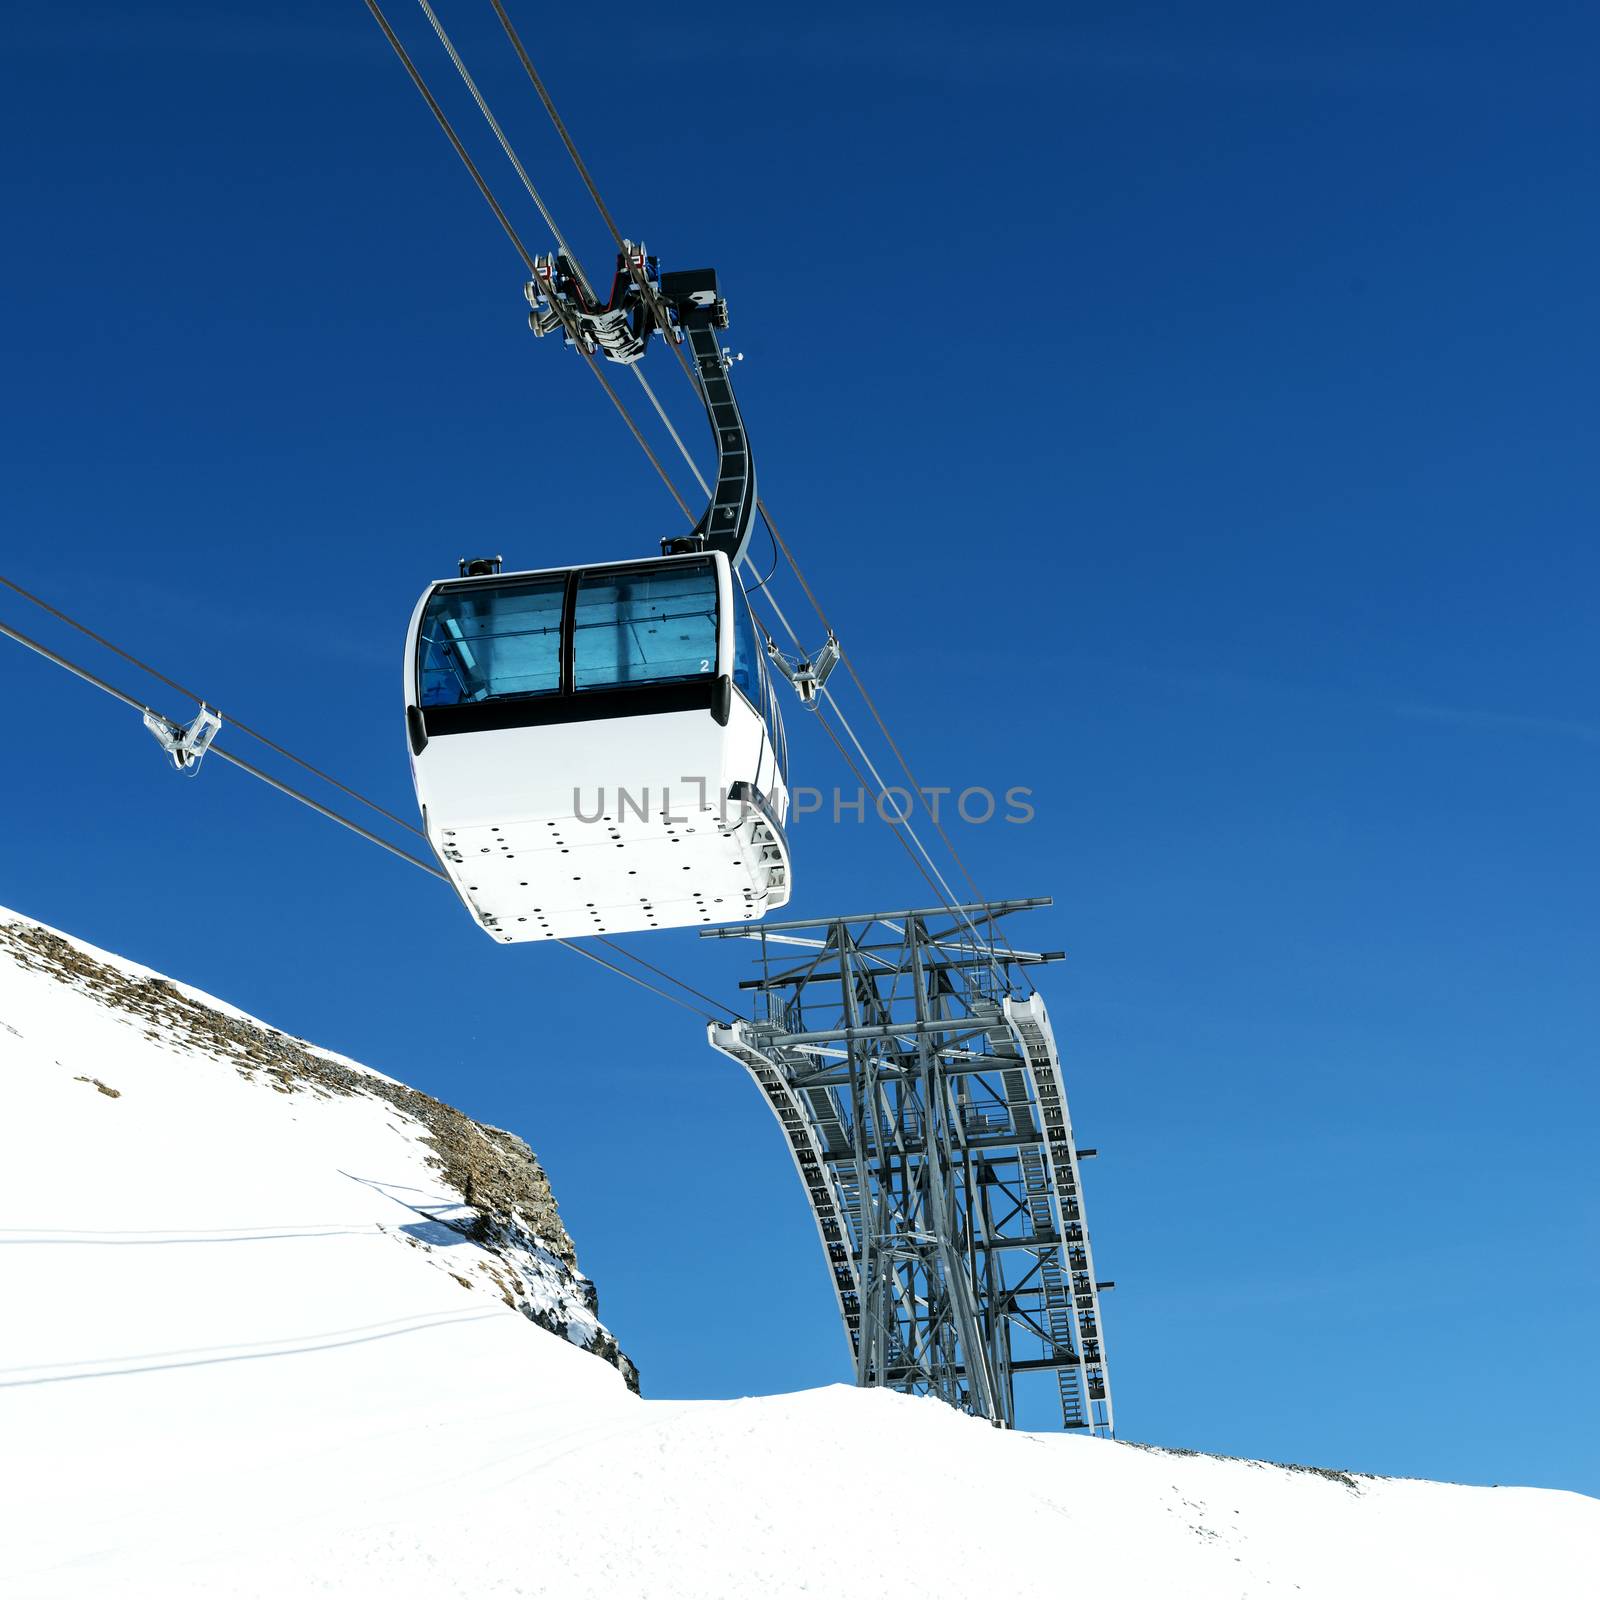 Cablecar to Val d'Isere, by ventdusud